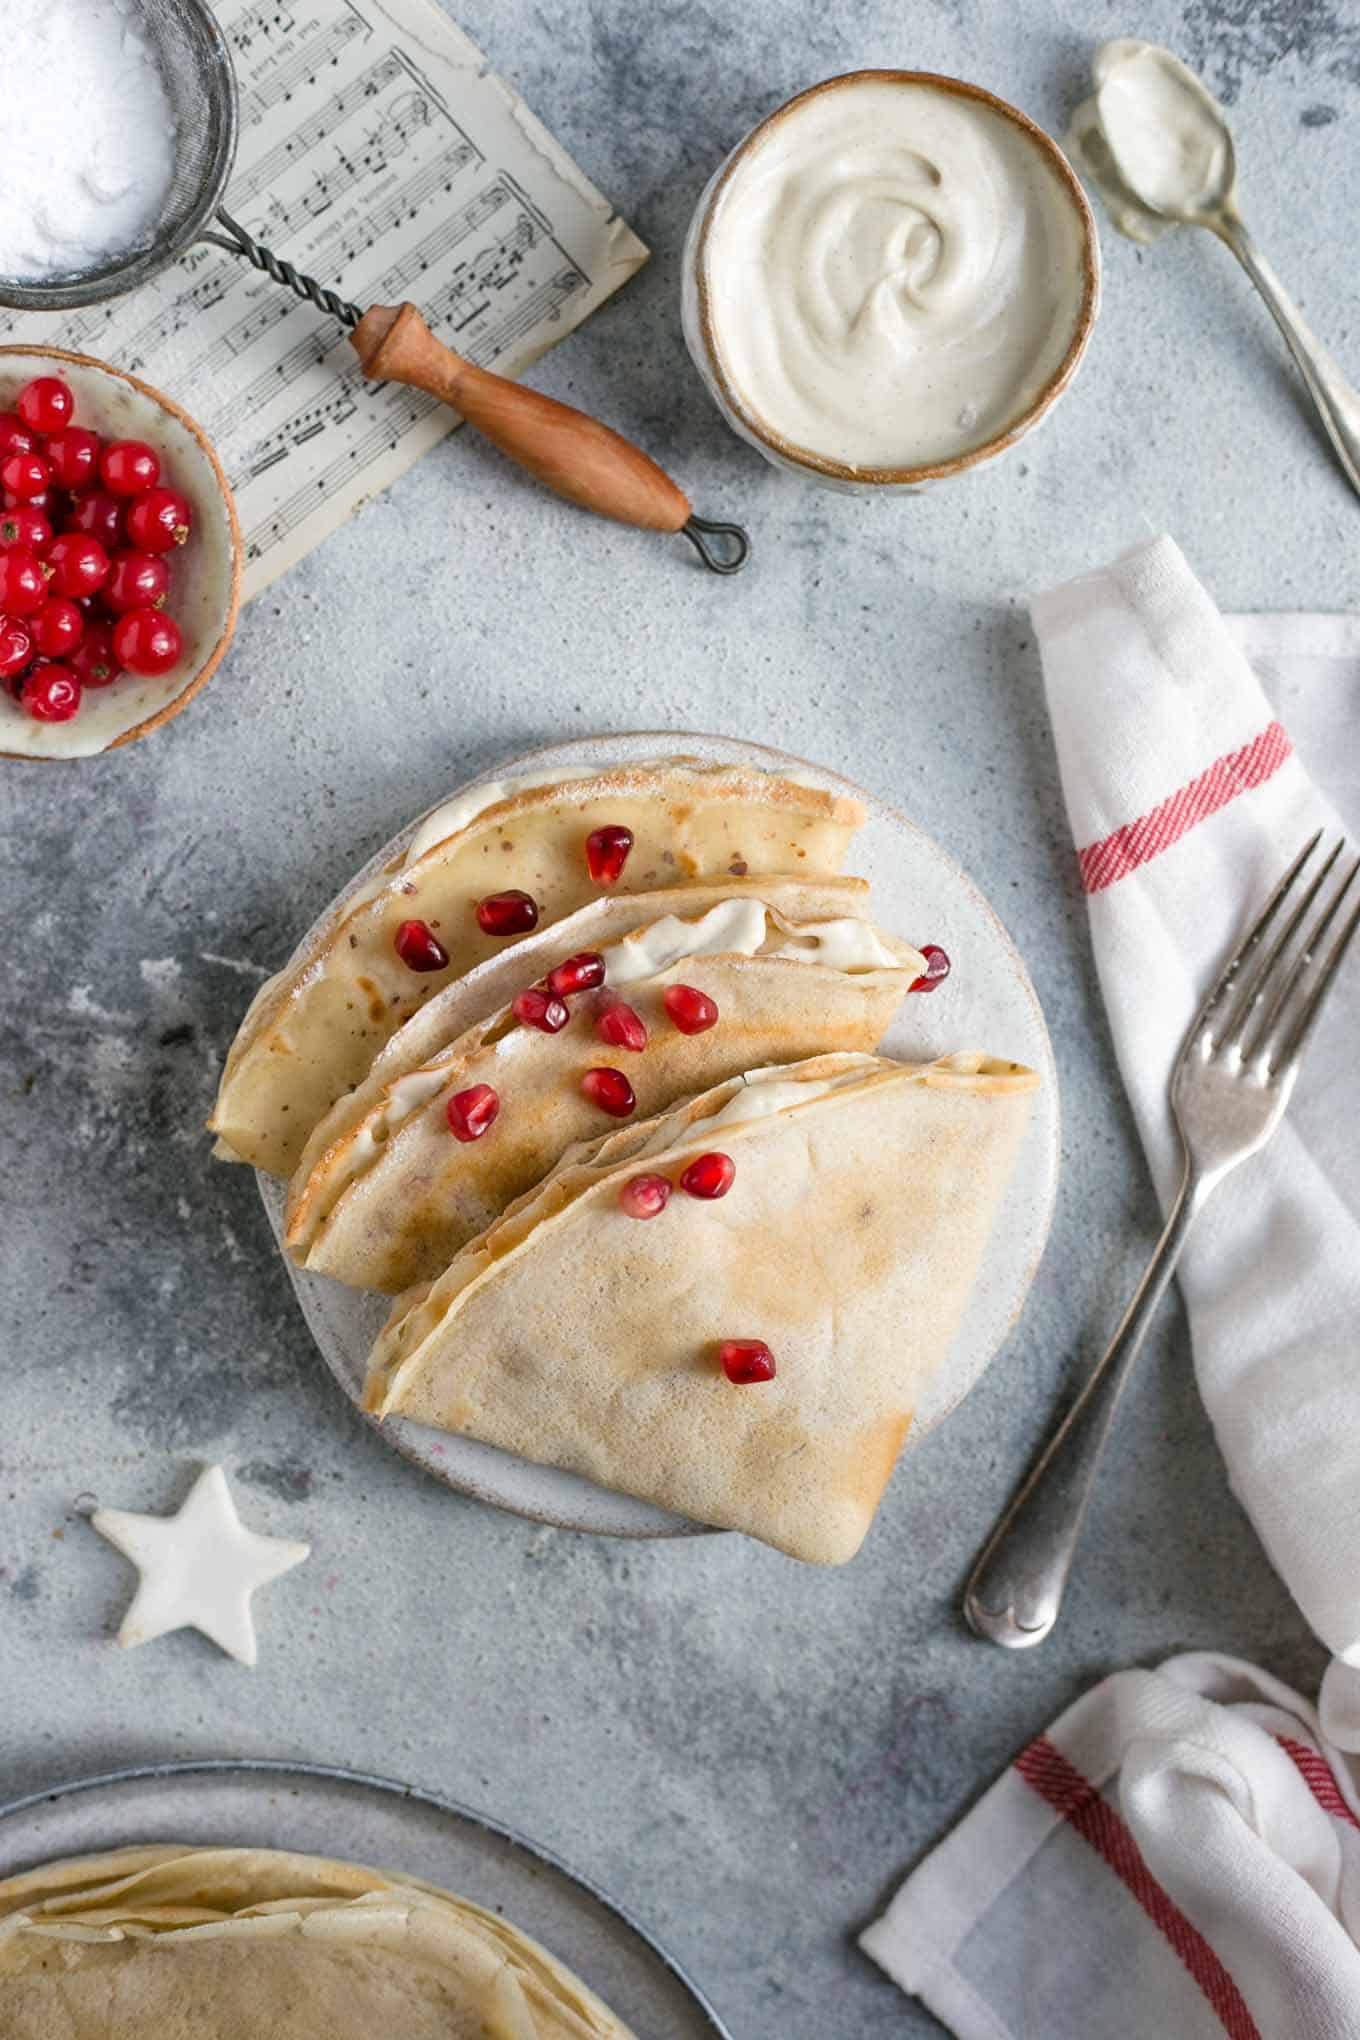 Delicious and delicate french crepes, ideal for breakfast or as a dessert #vegan #crepes #plantbased | via @annabanana.co